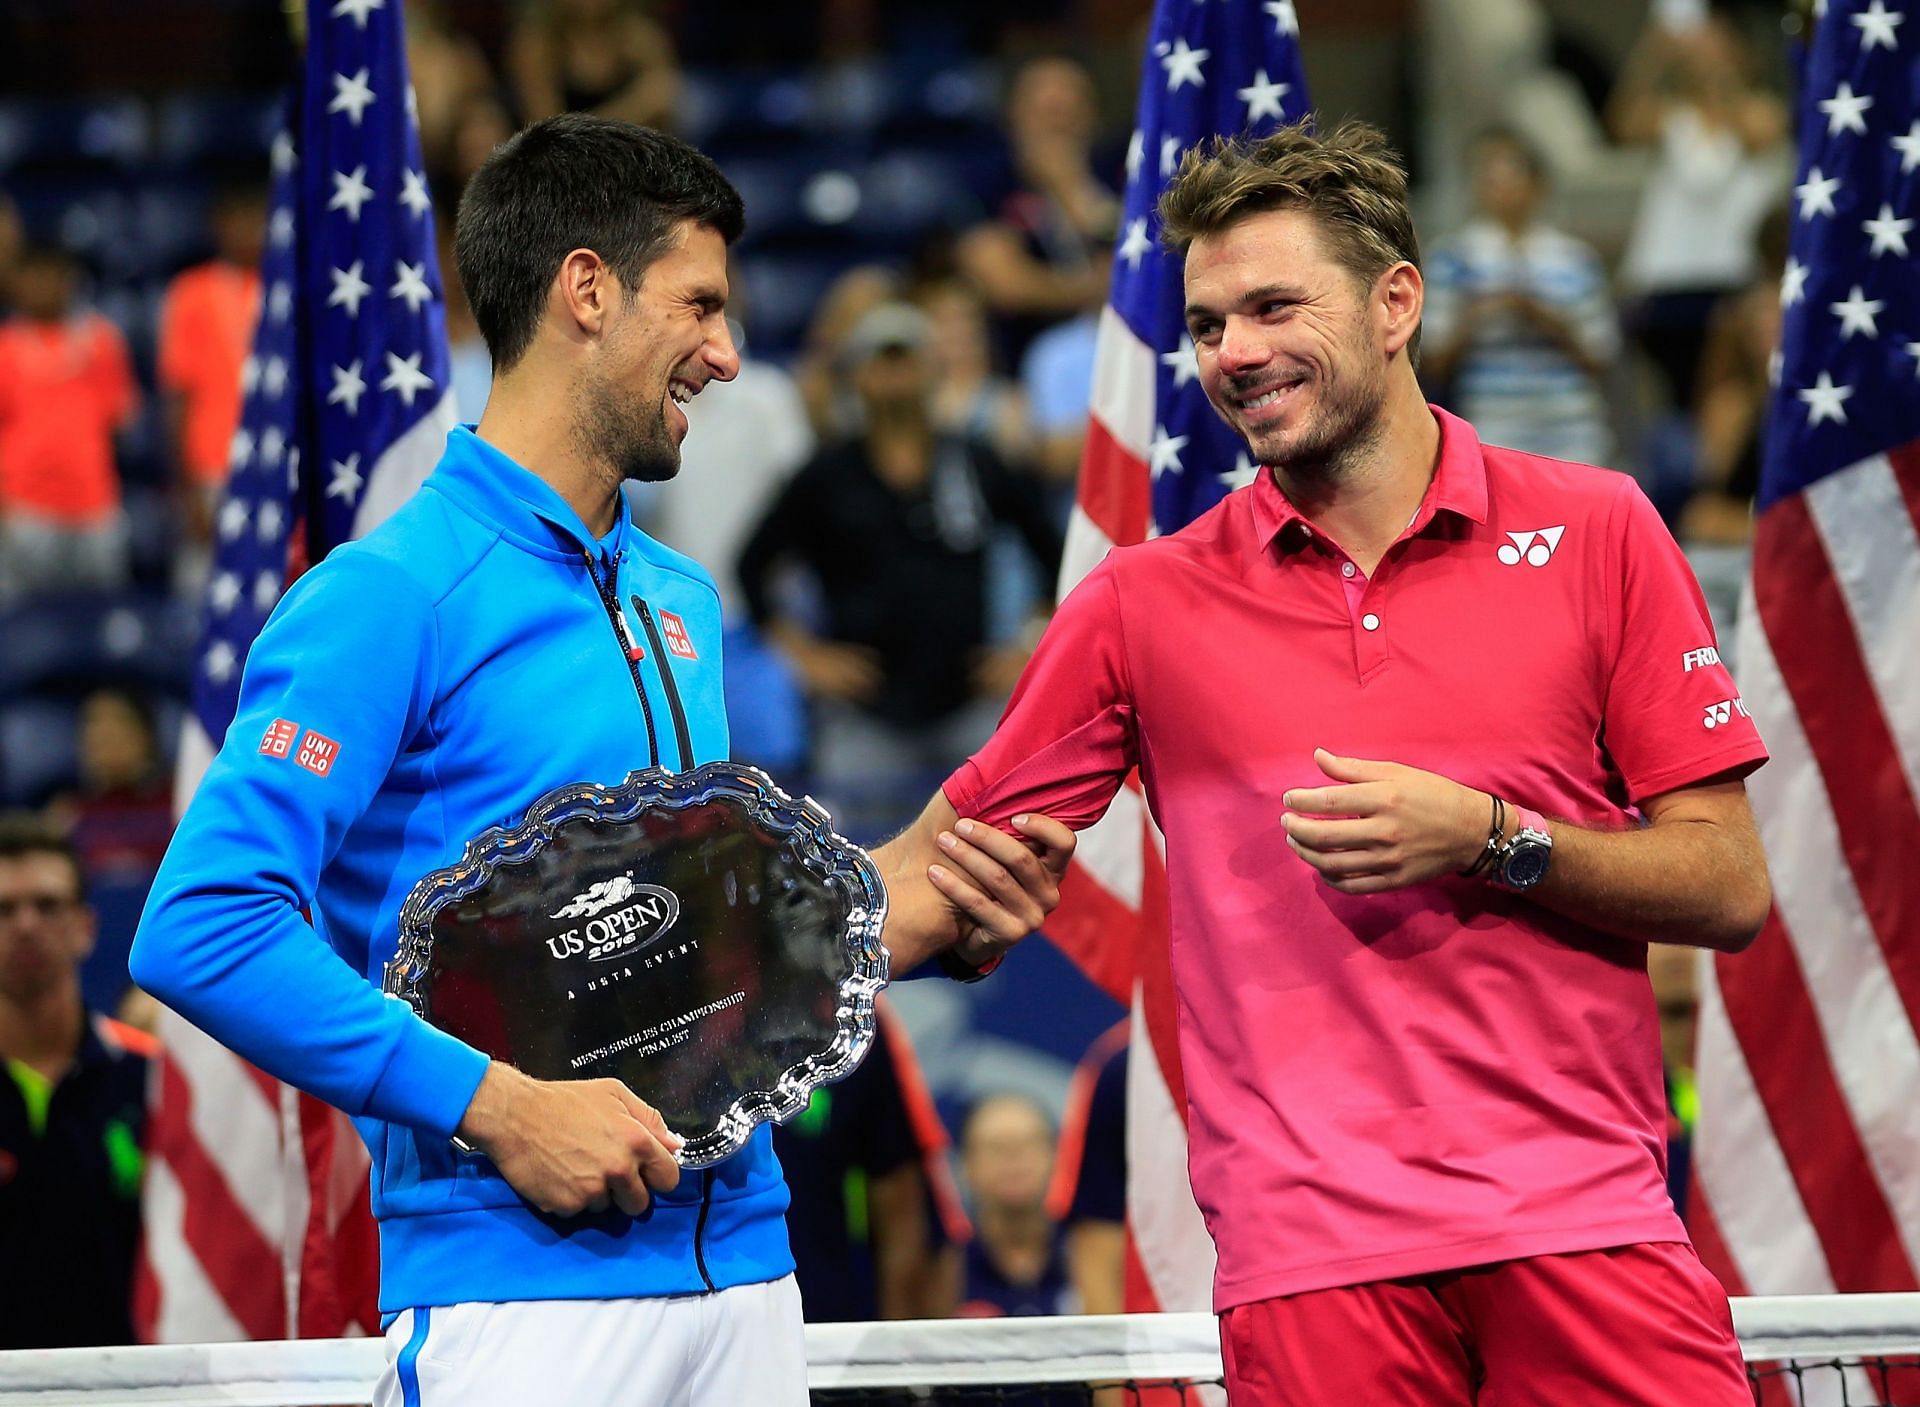 Novak Djokovic and Stan Wawrinka are all smiles during the US Open 2016 championship ceremony